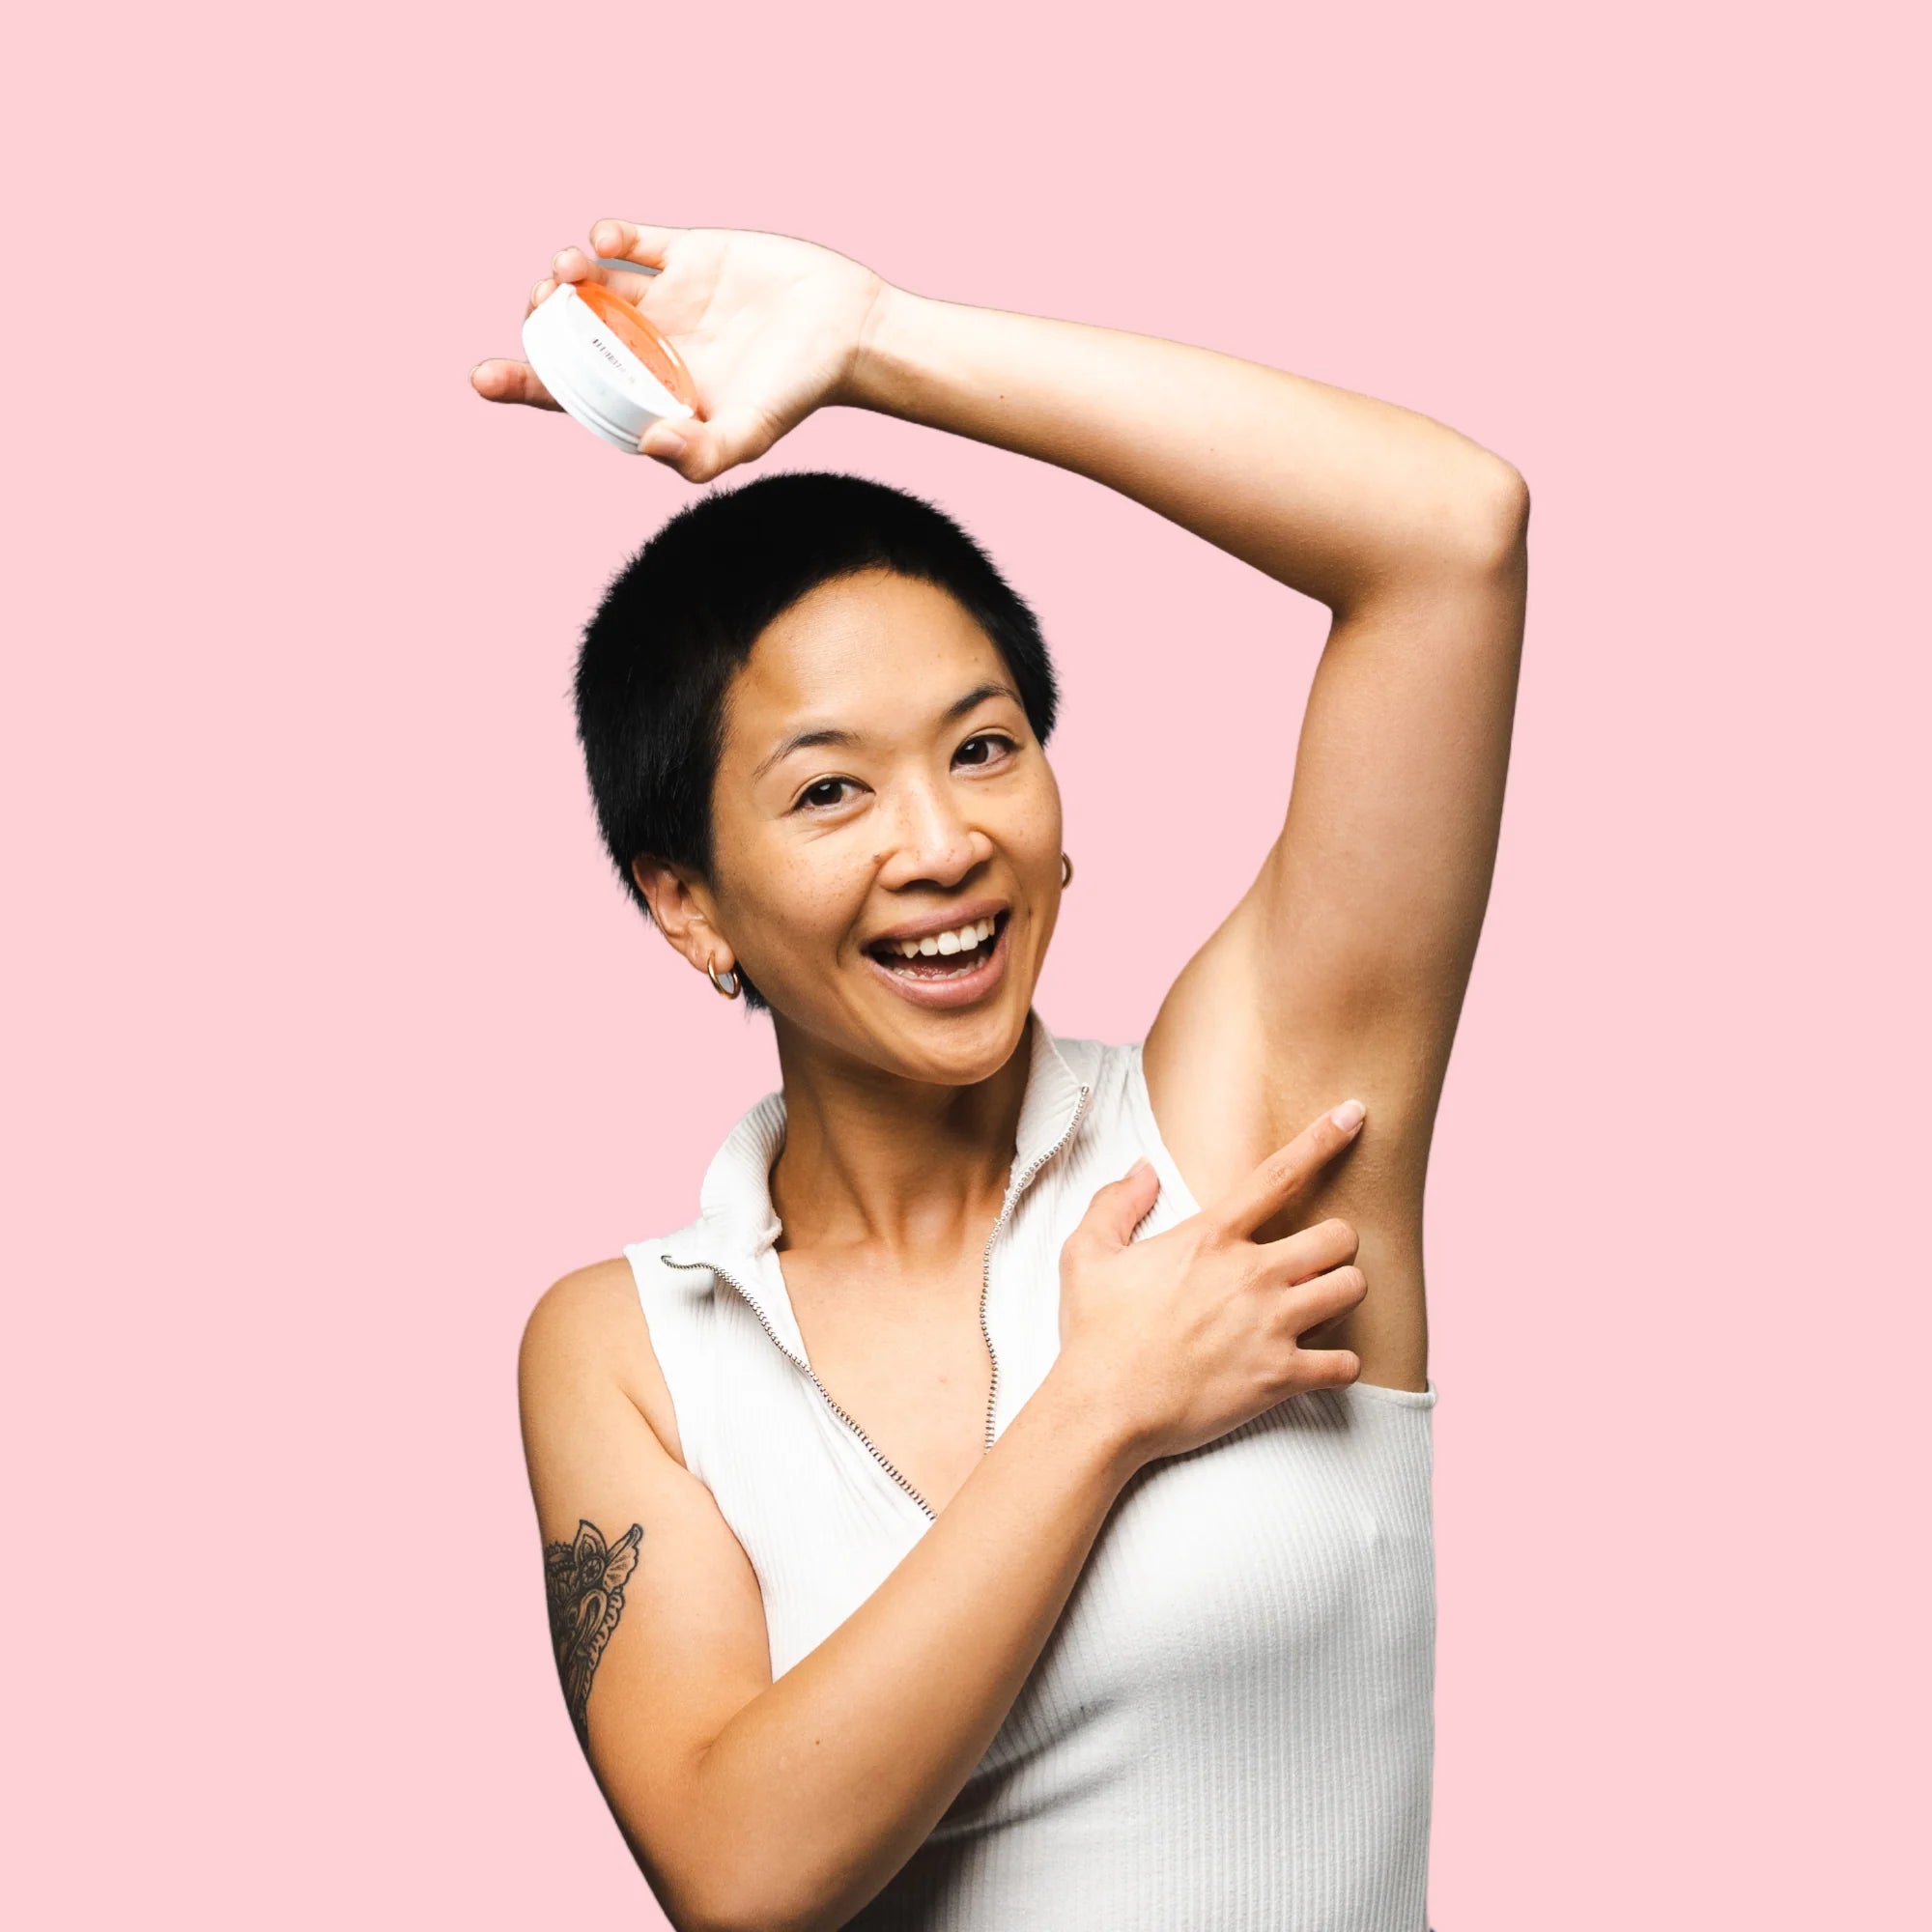 Image of a woman in a white sleeveless shirt holding an Urban Natural Deodorant Paste tin in one hand over her head as she shows her armpit with already absorbed product as she is smiling at the camera in front of a pink background